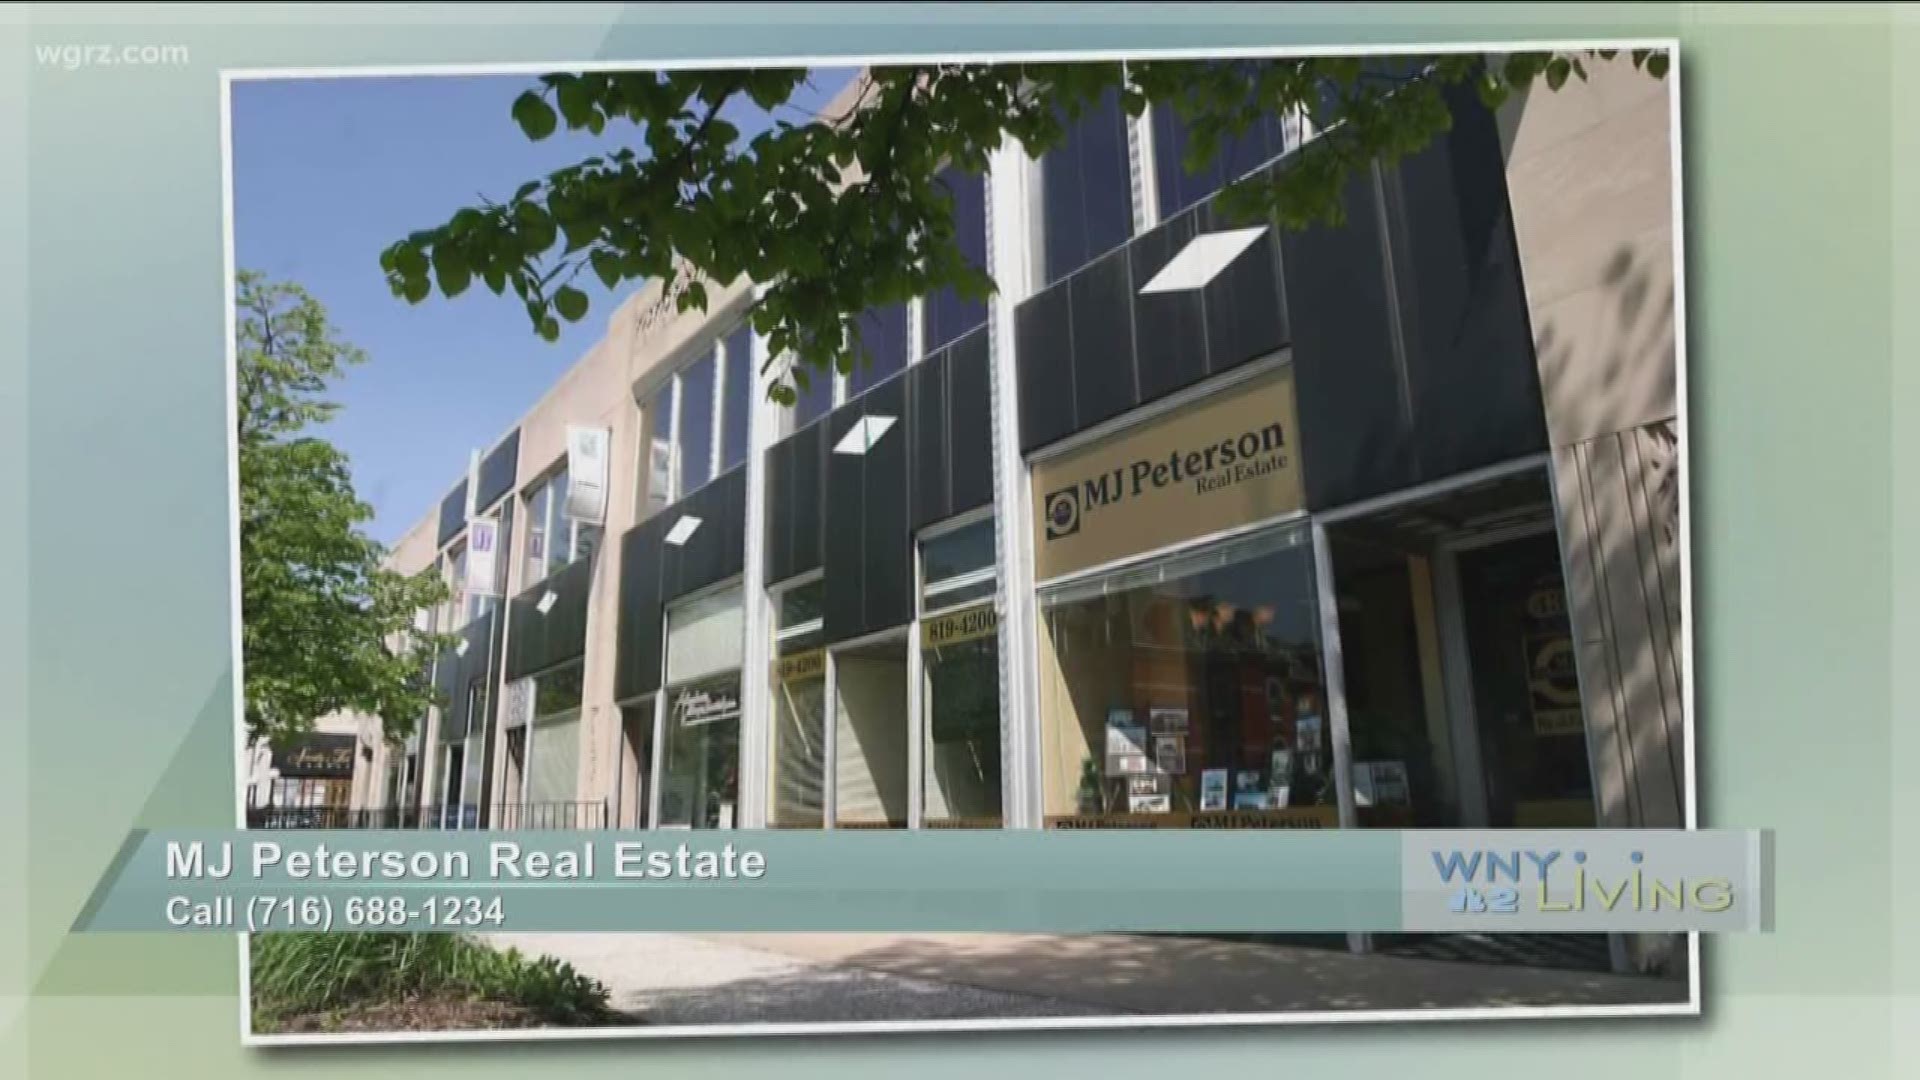 WNY Living - October 22 - WECK MJ Peterson Real Estate